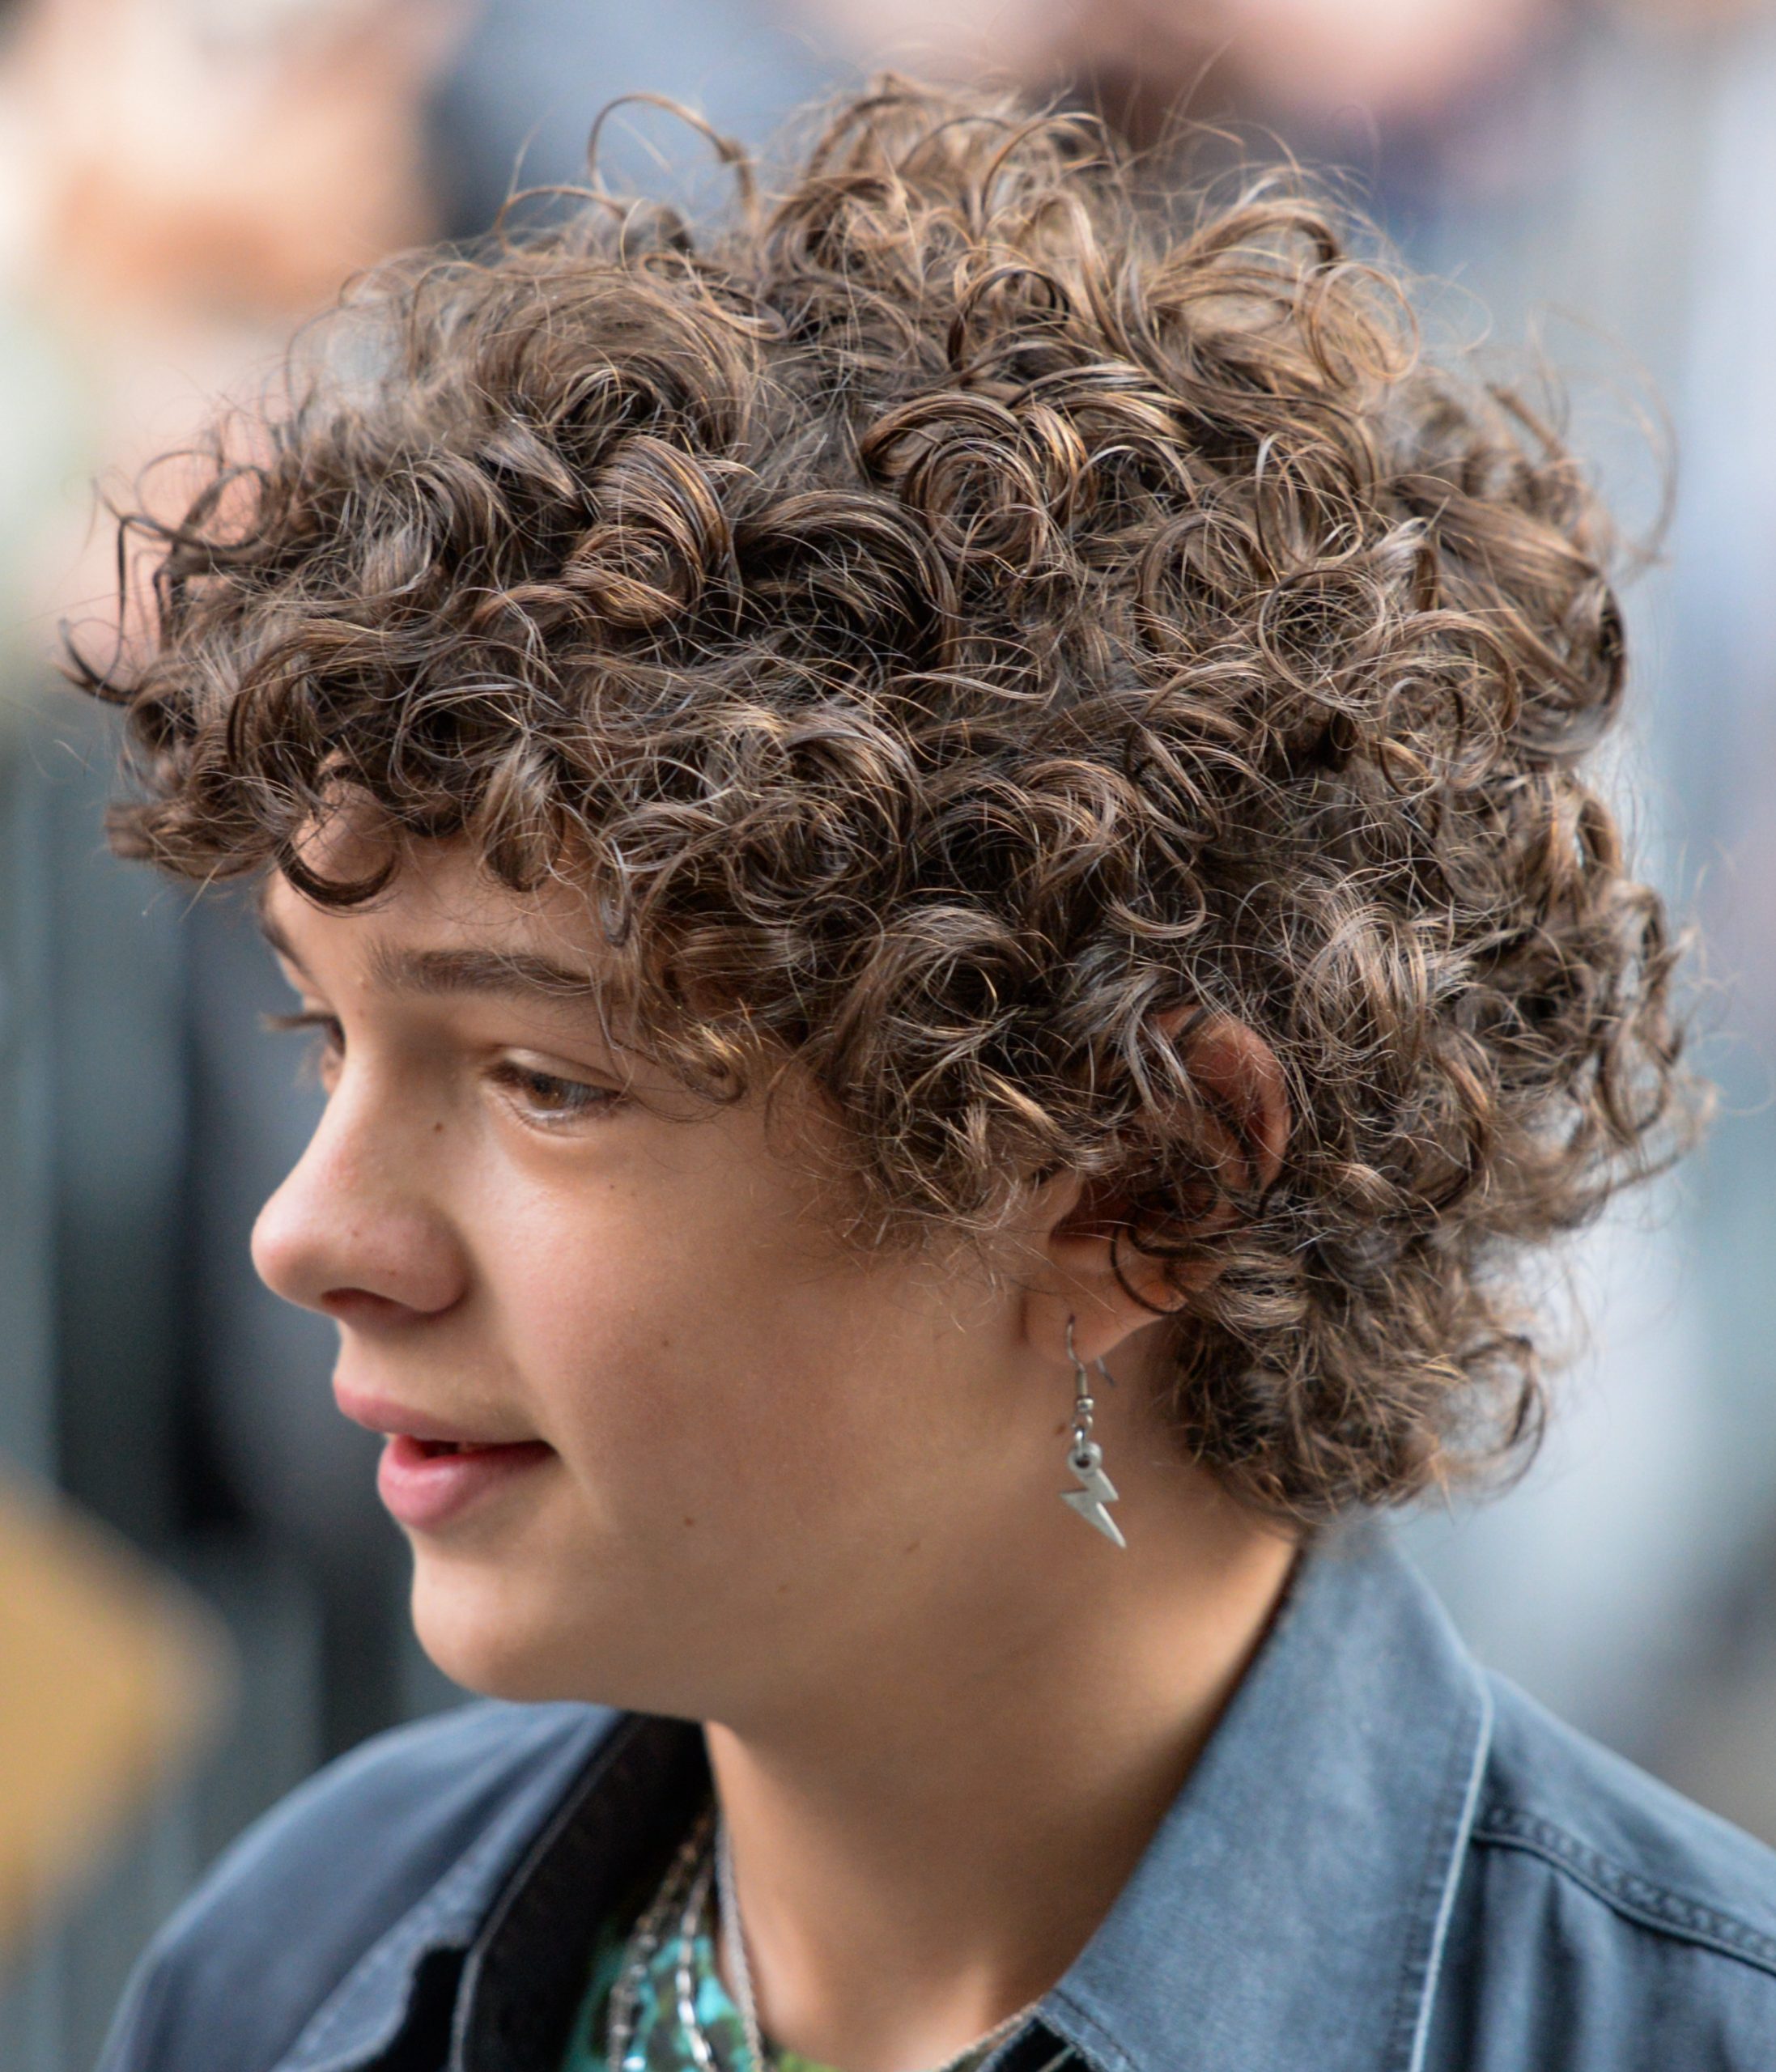 Who Is Noah Jupe? Noah Jupe Age, Wiki, Career, Net Worth, Personal Life And More